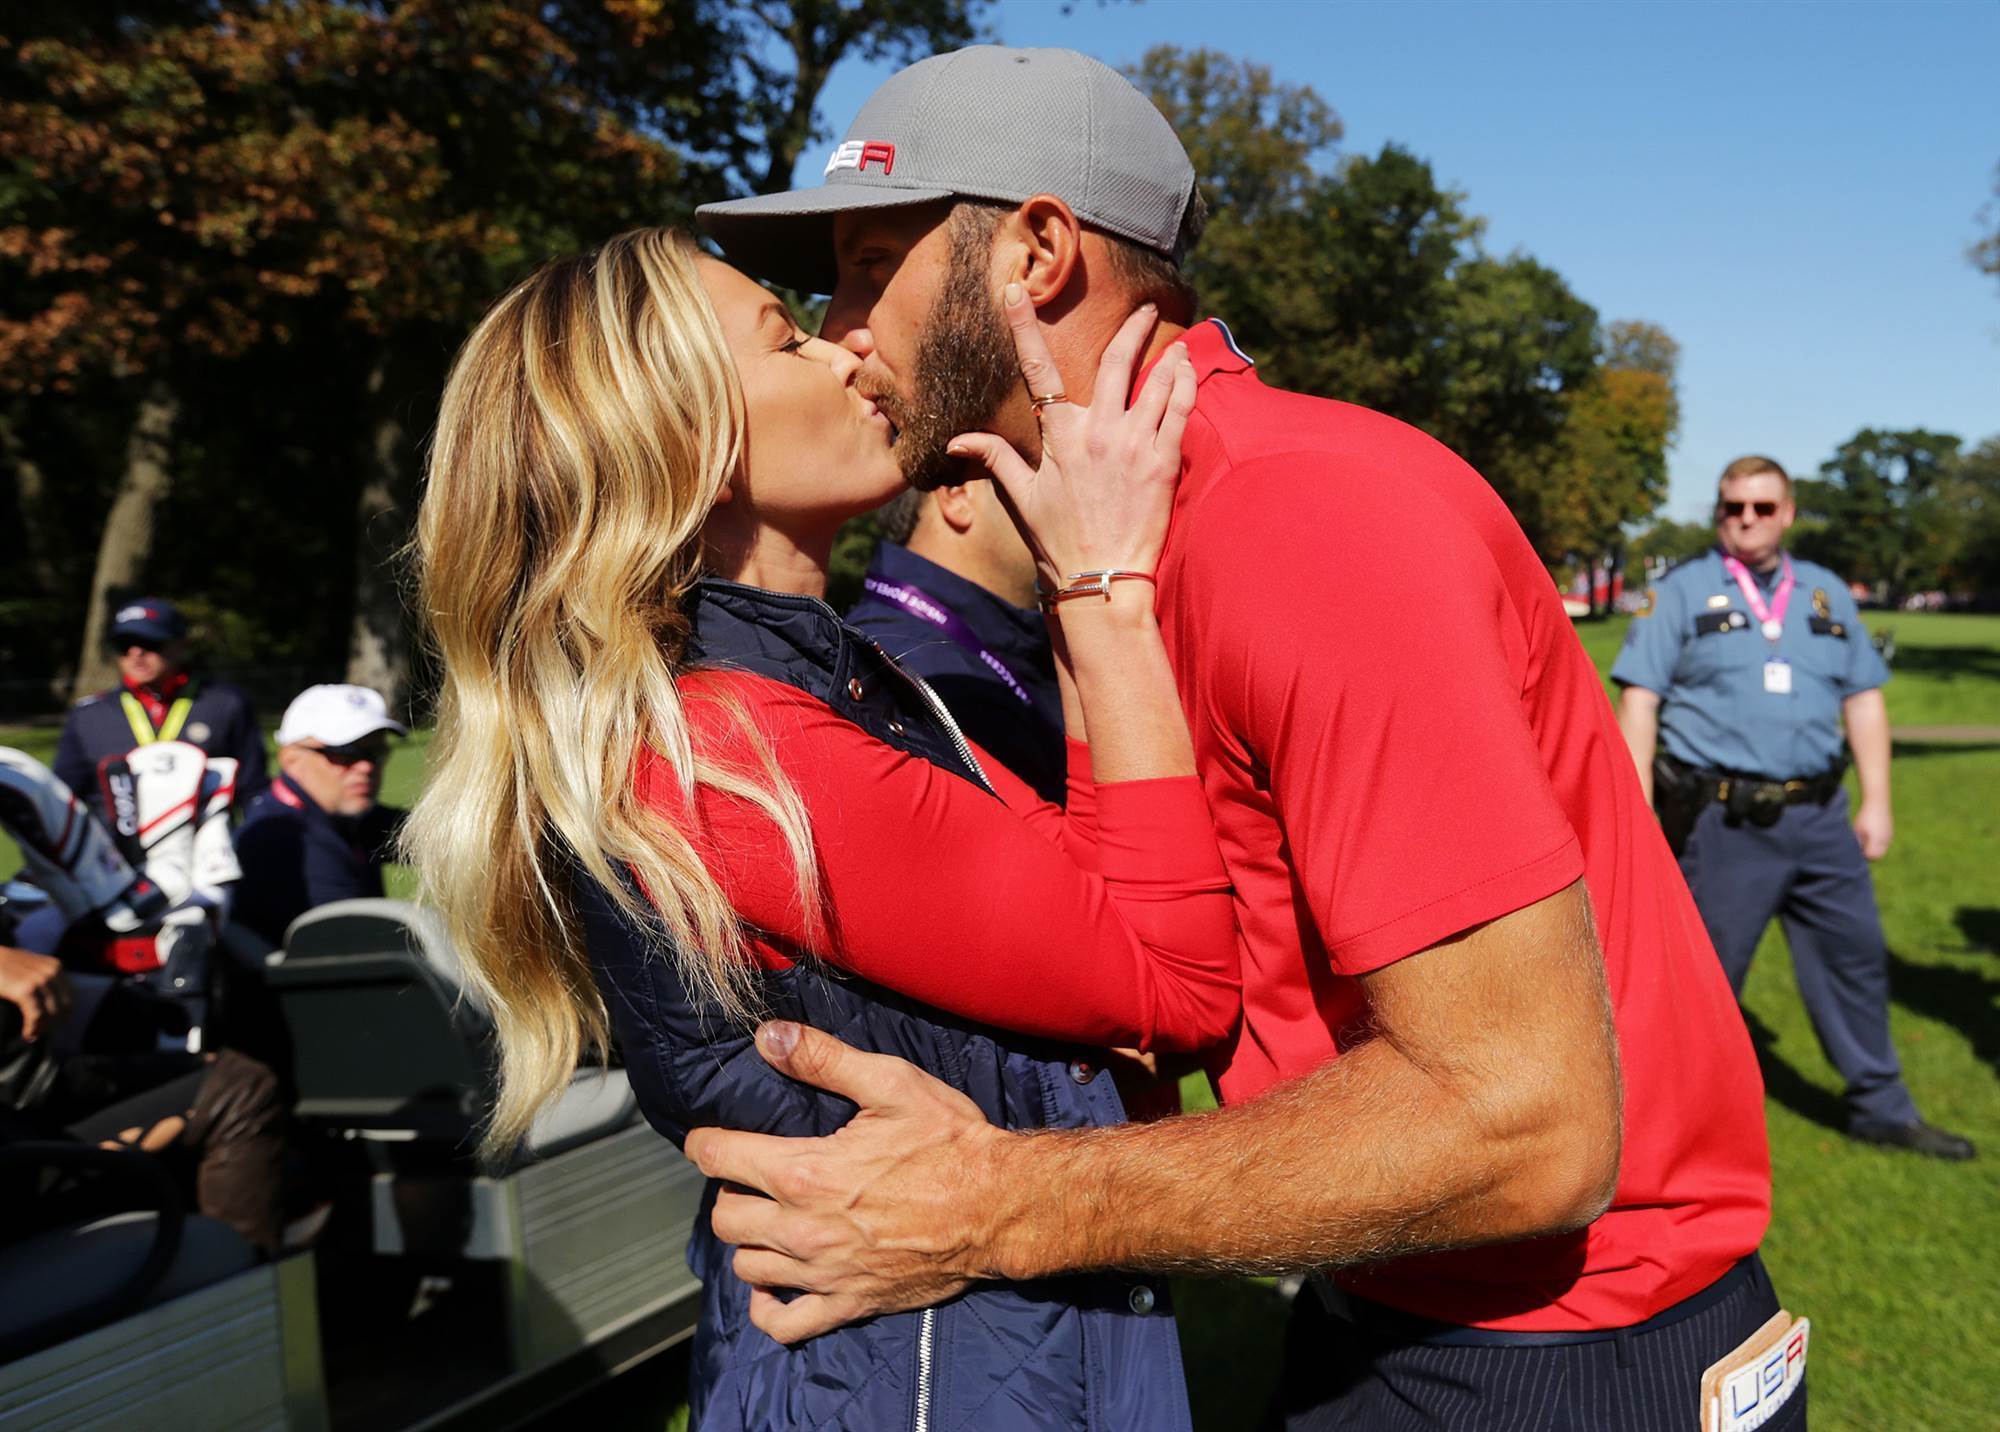 Paulina Gretzky and Dustin Johnson appear to be reunited at Ryder Cup